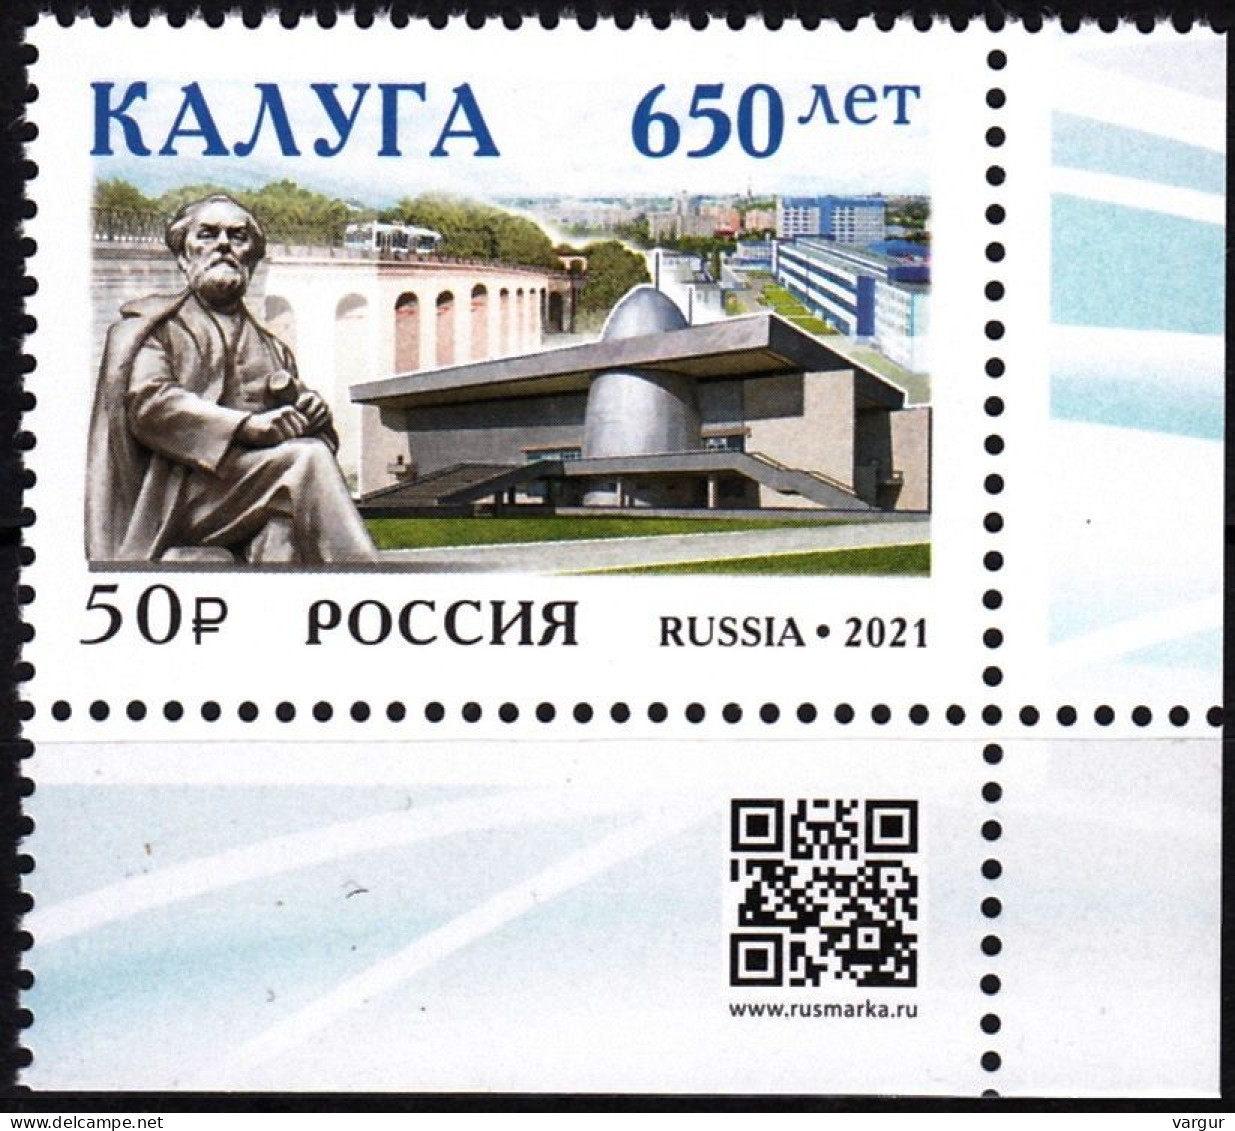 RUSSIA 2021-47 Architecture Space Monument. Kaluga Town - 650. QR CORNER, MNH - Russie & URSS